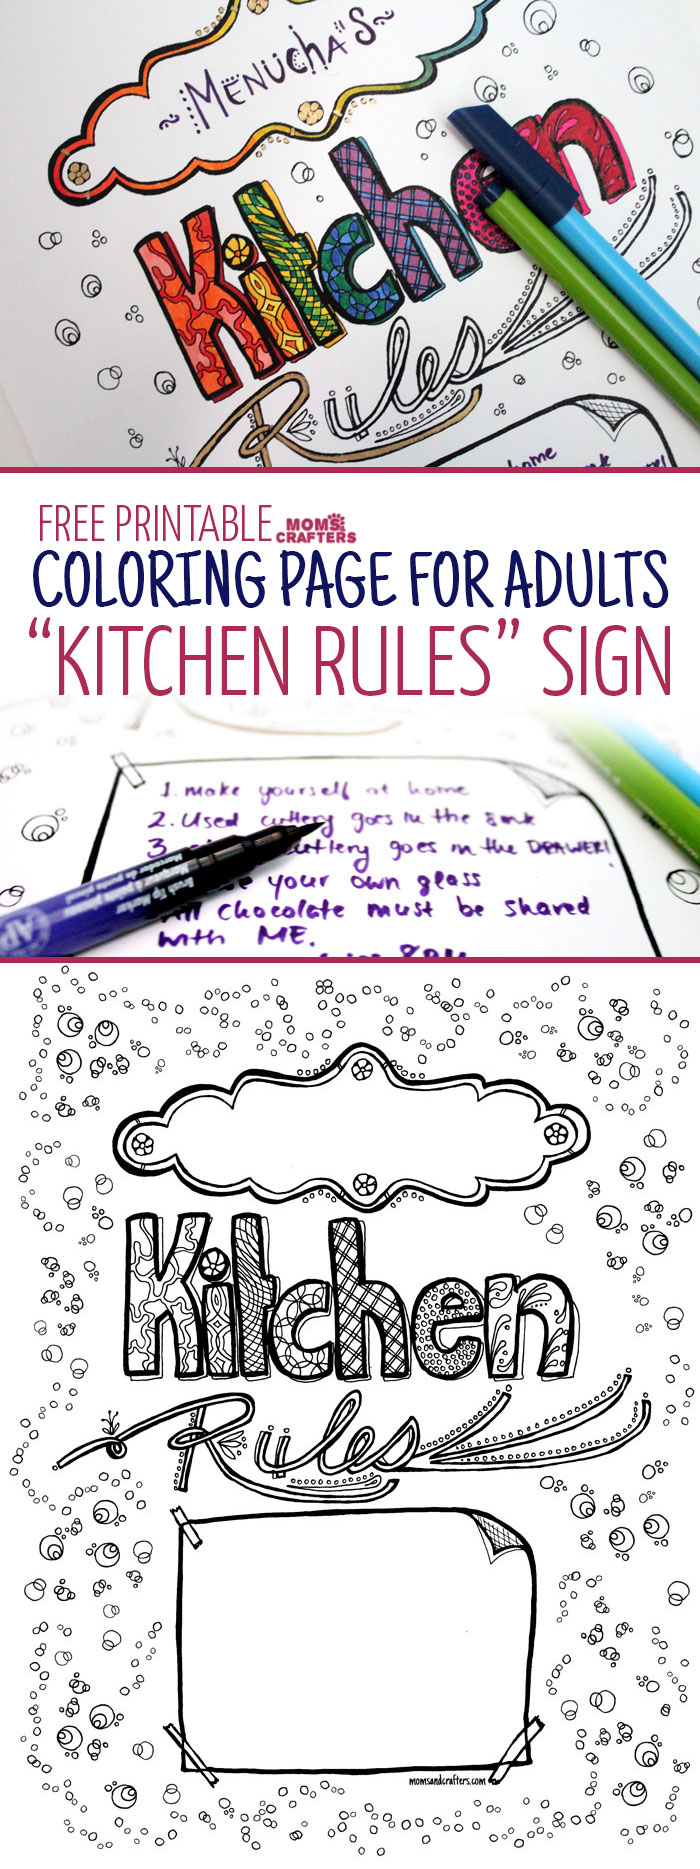 Decorate your kitchen with your own art! Color in this free printable coloring page for adults and add your own name and kitchen rules to it.